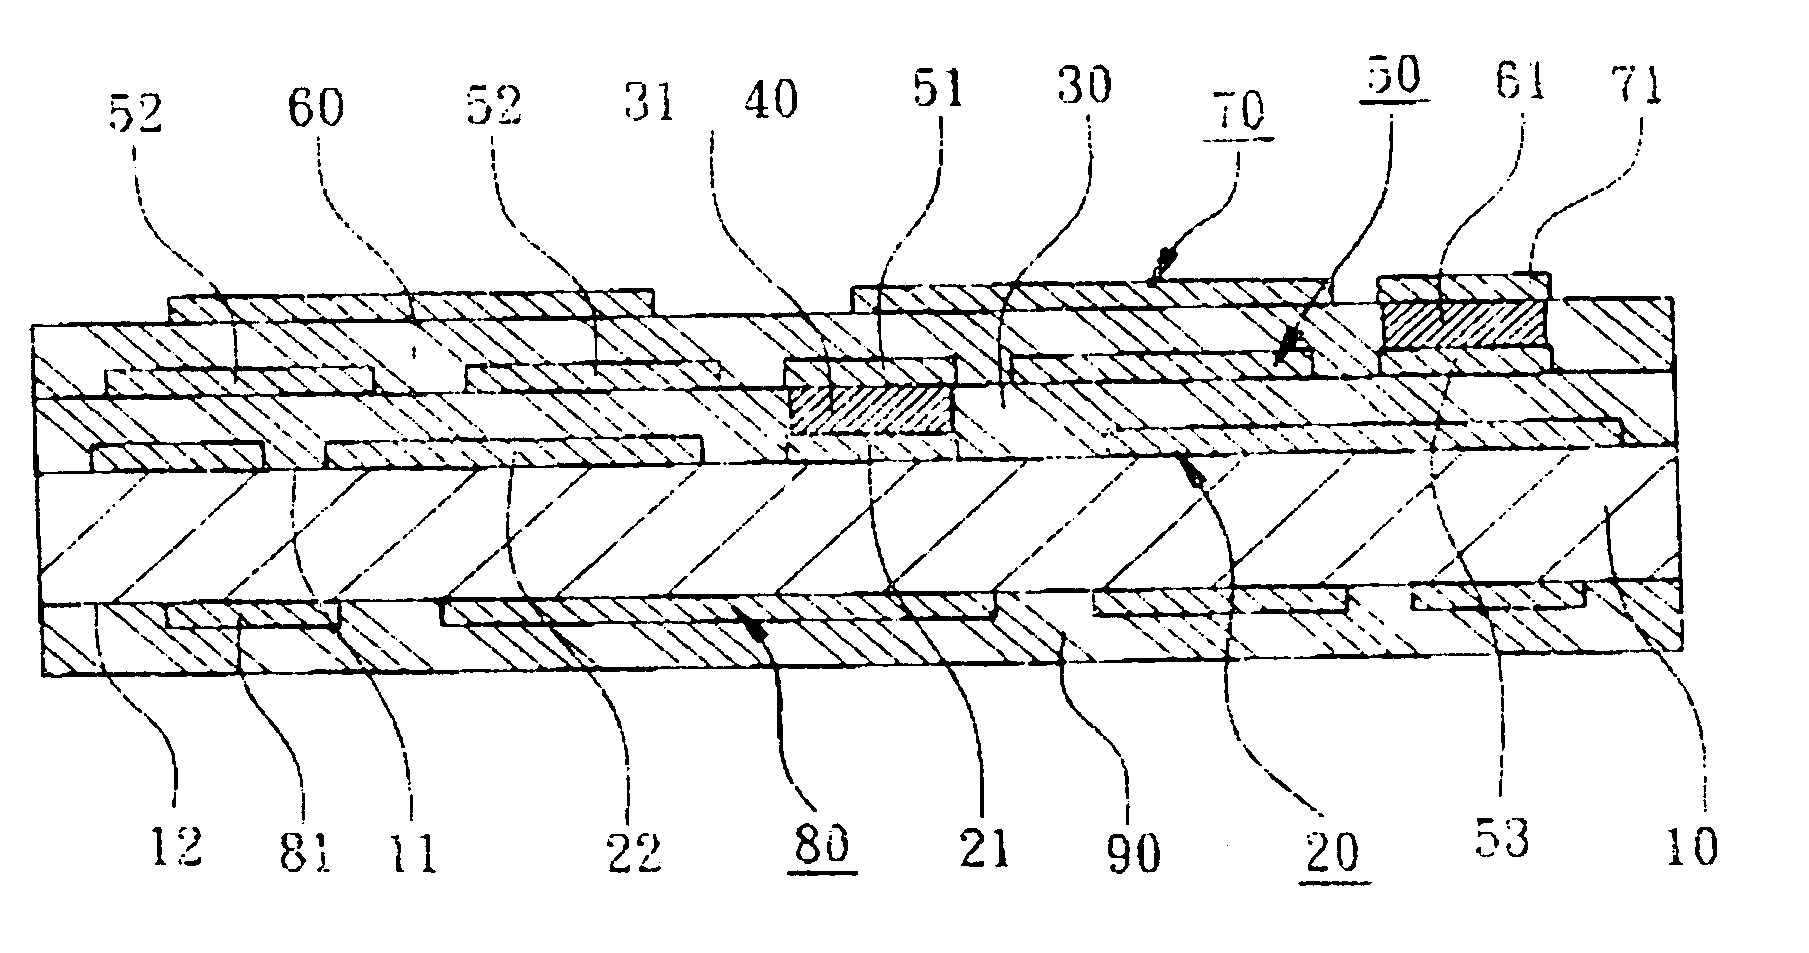 Process for manufacturing a substrate with embedded capacitor